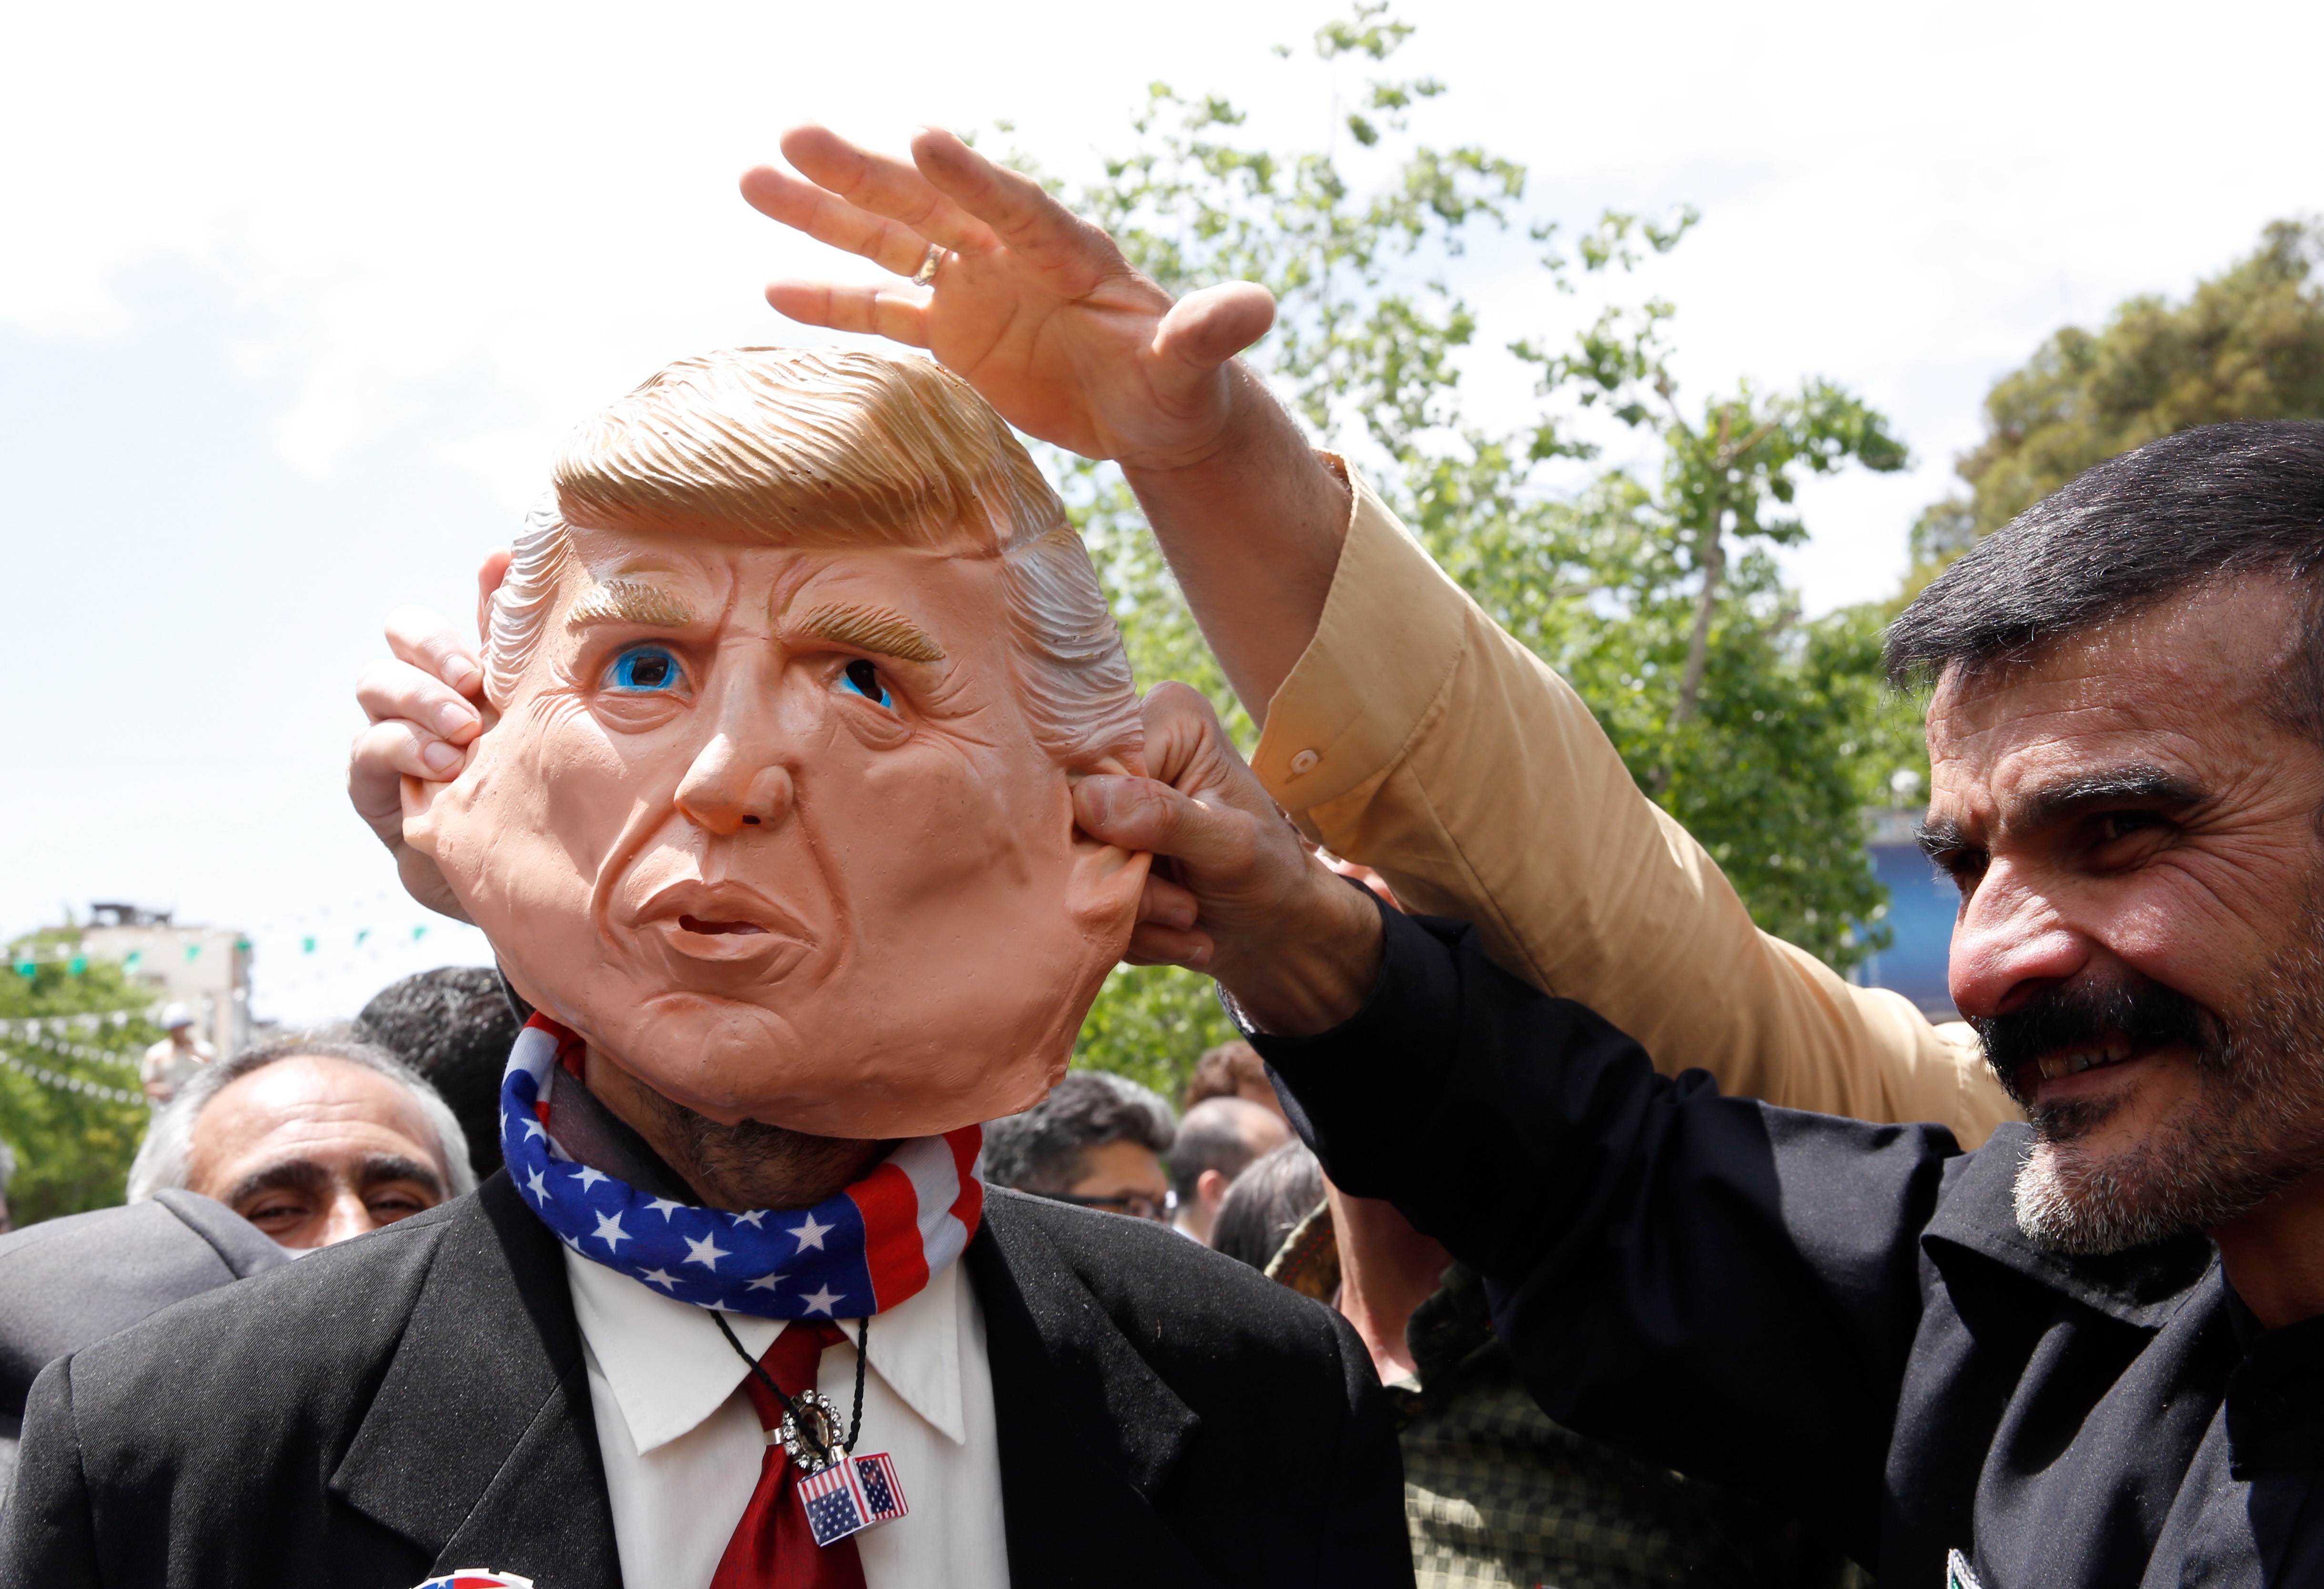 Demonstrators tug at a mask of President Donald Trump at an anti-US rally in Iran on May 10. Whether it is Iran, North Korea, Venezuela or China, Trump has failed to solve the knottiest US foreign policy dilemmas with the sheer force of his deal-making savvy or charisma. Photo: EPA-EFE